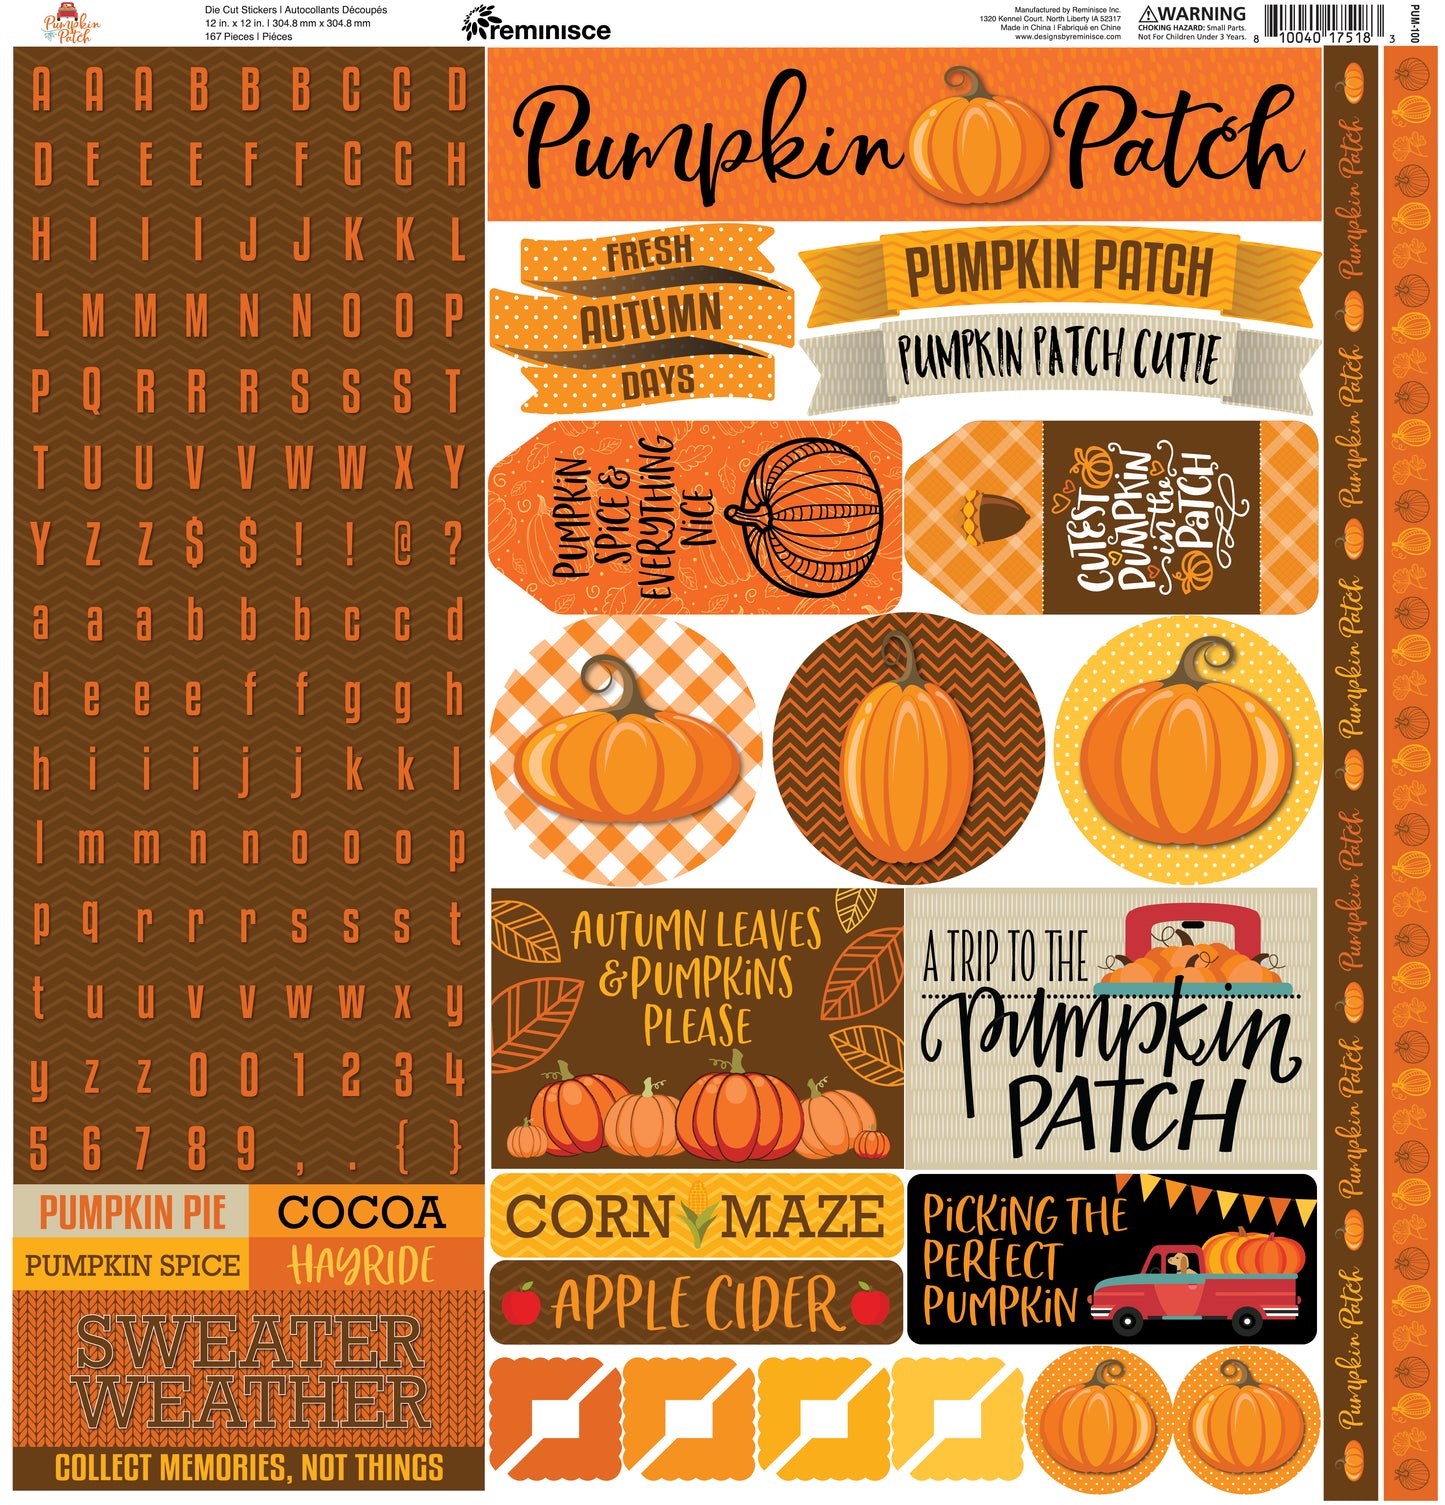 Pumpkin Patch Stickers by Reminisce